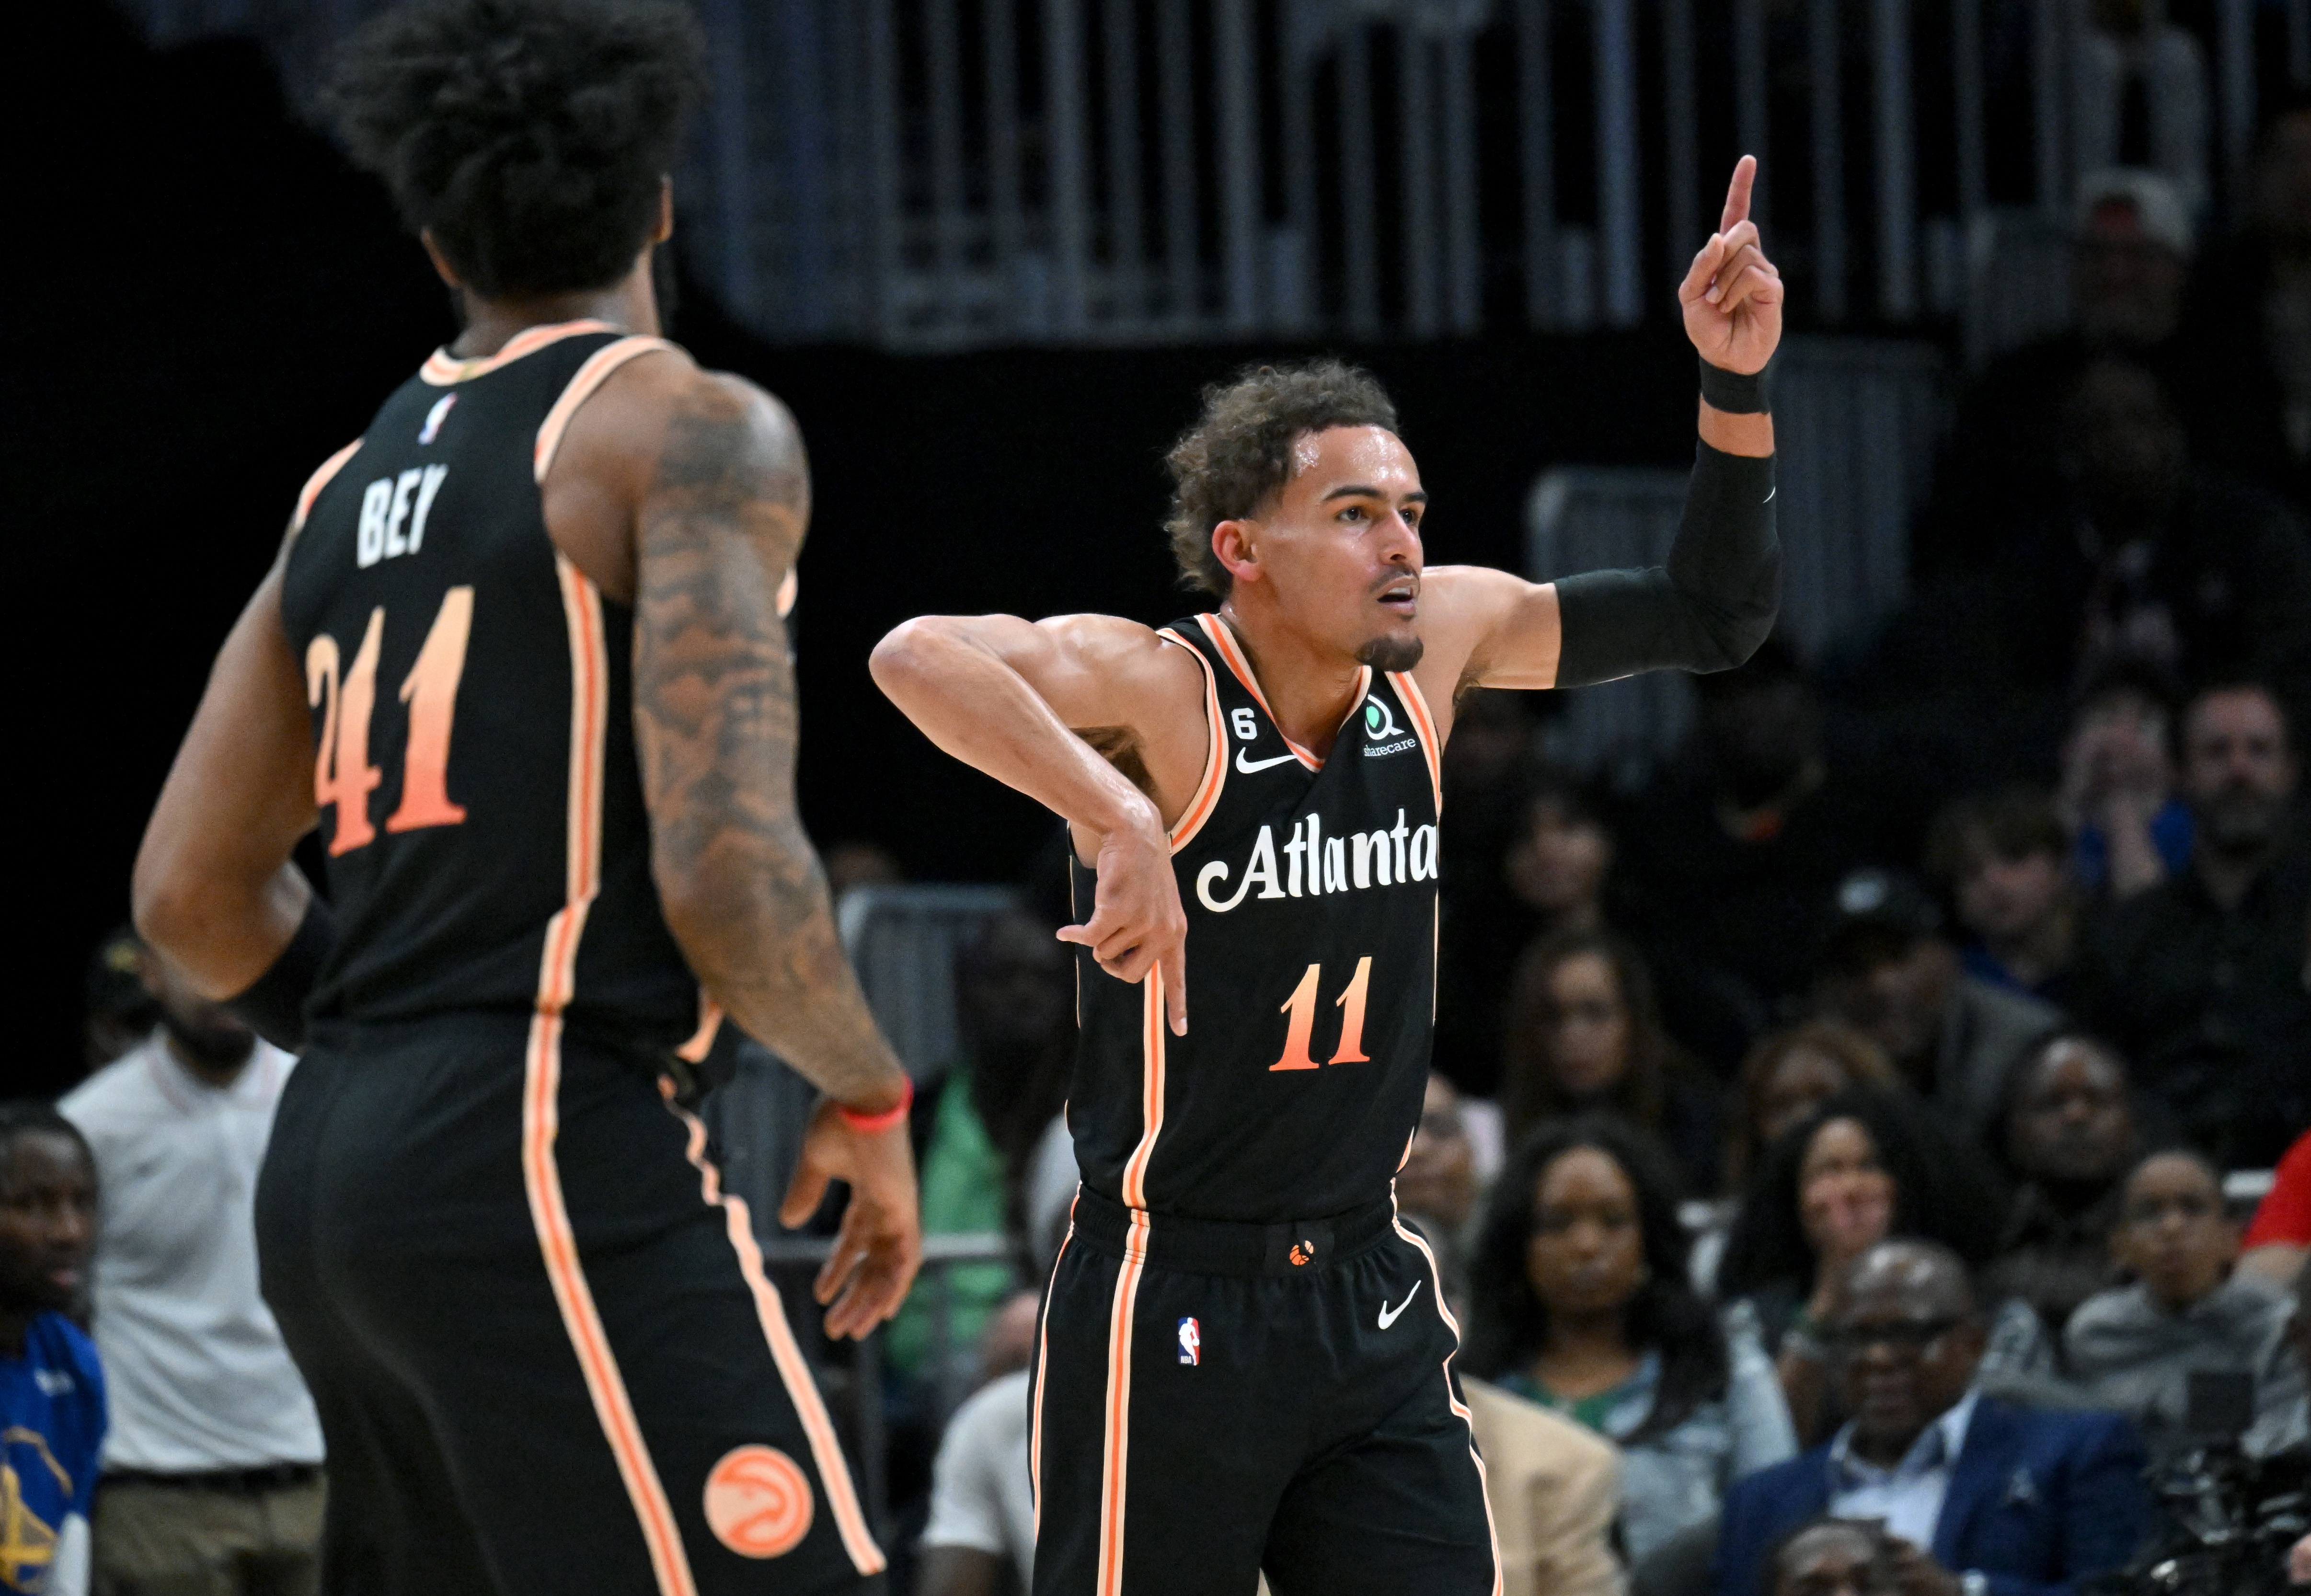 Trae Young, Hawks hand Warriors 10th straight road loss, 127-119